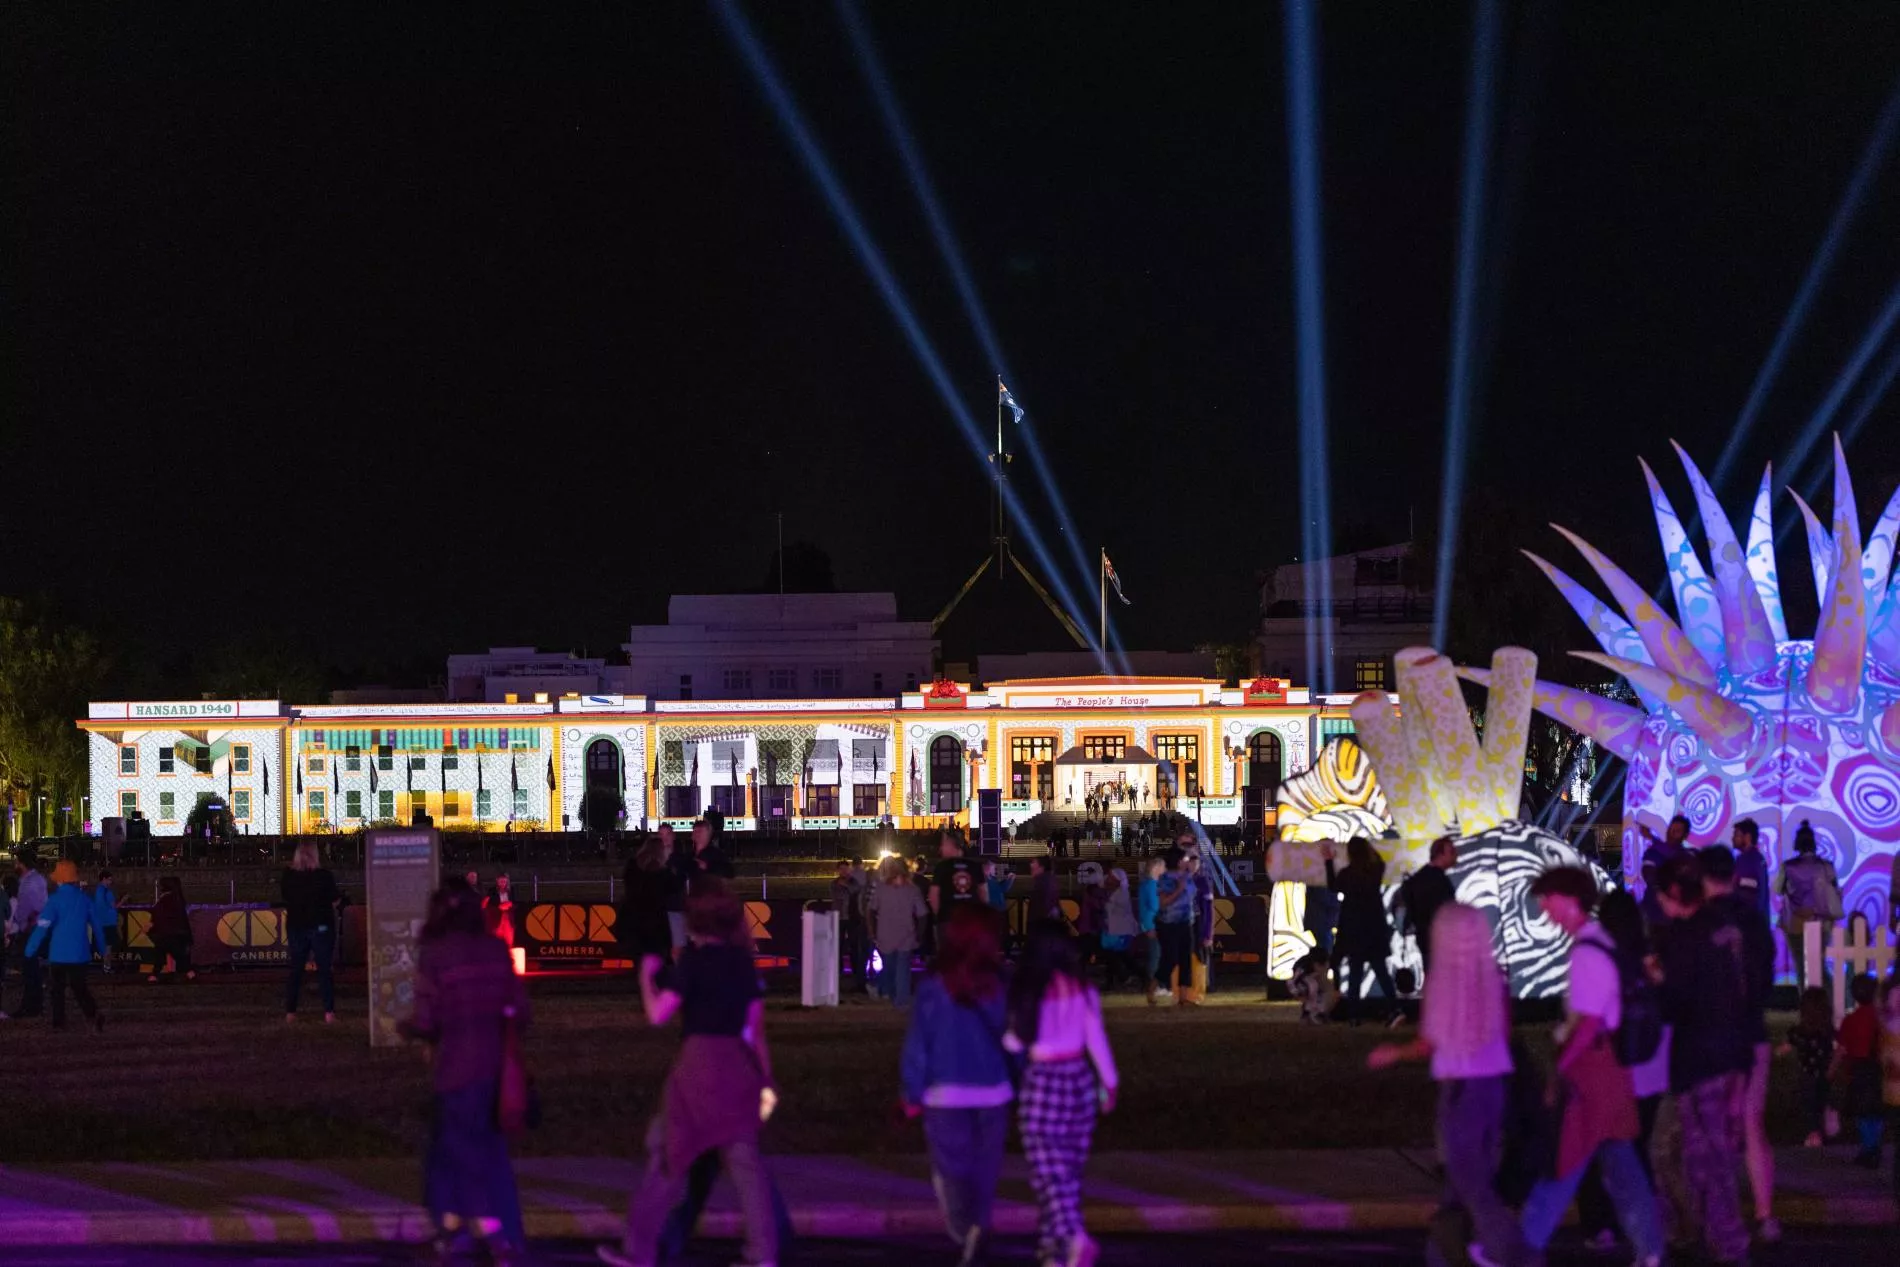 A night shot of Old Parliament House, a large white long building, with people gathering out the front and coloured lights projected onto the surface.